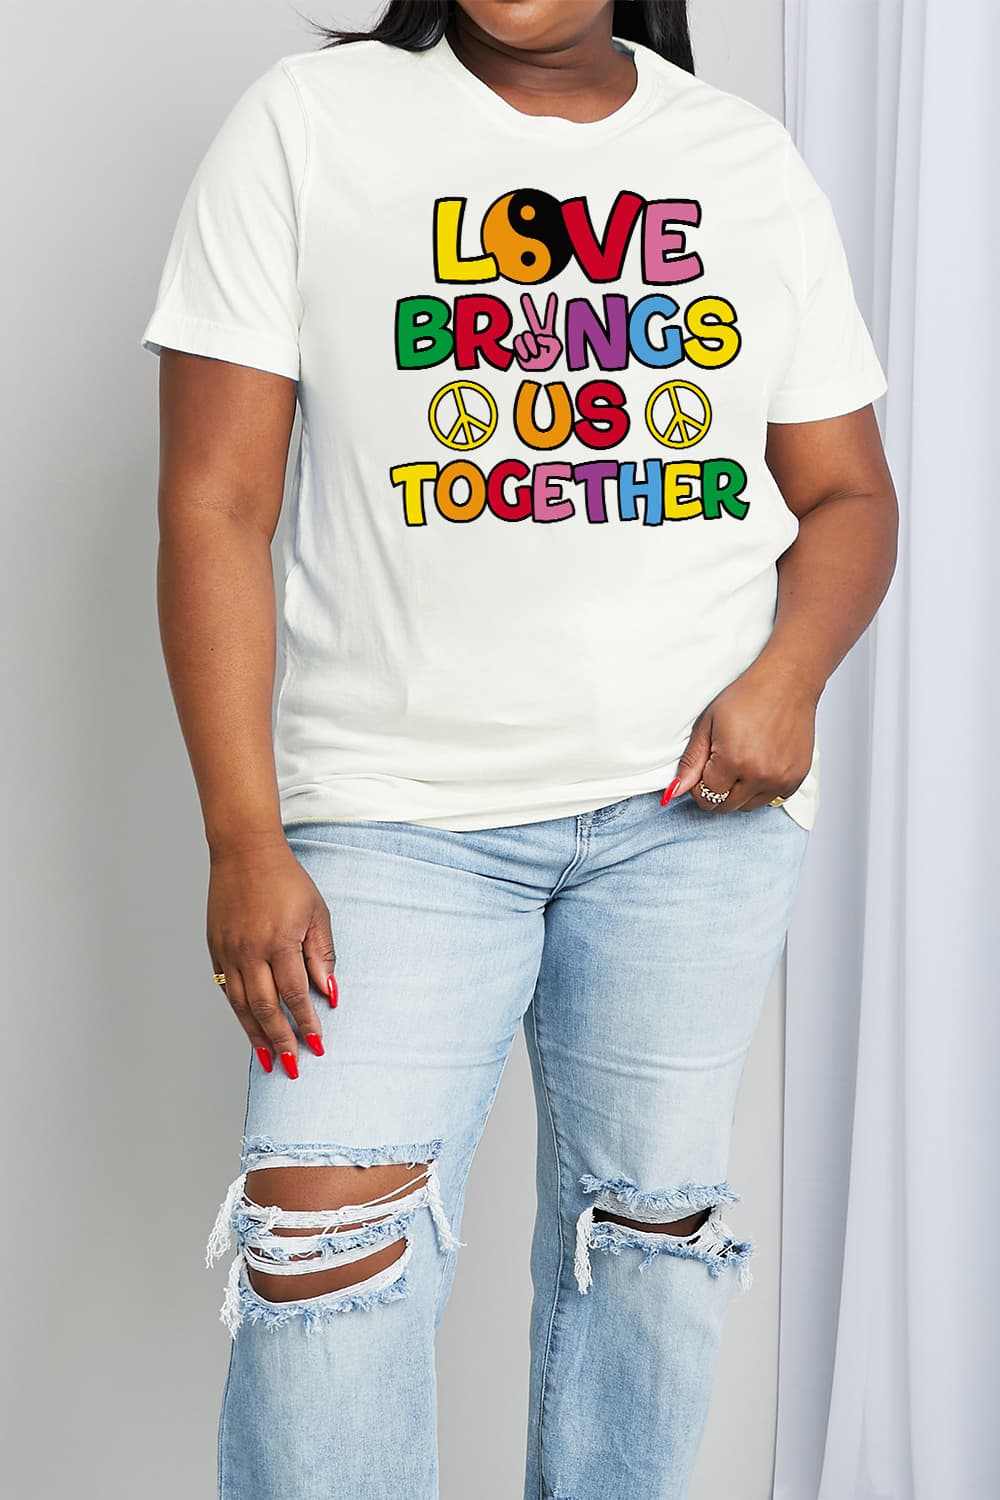 Simply Love Full Size LOVE BRINGS US TOGETHER Graphic Cotton Tee